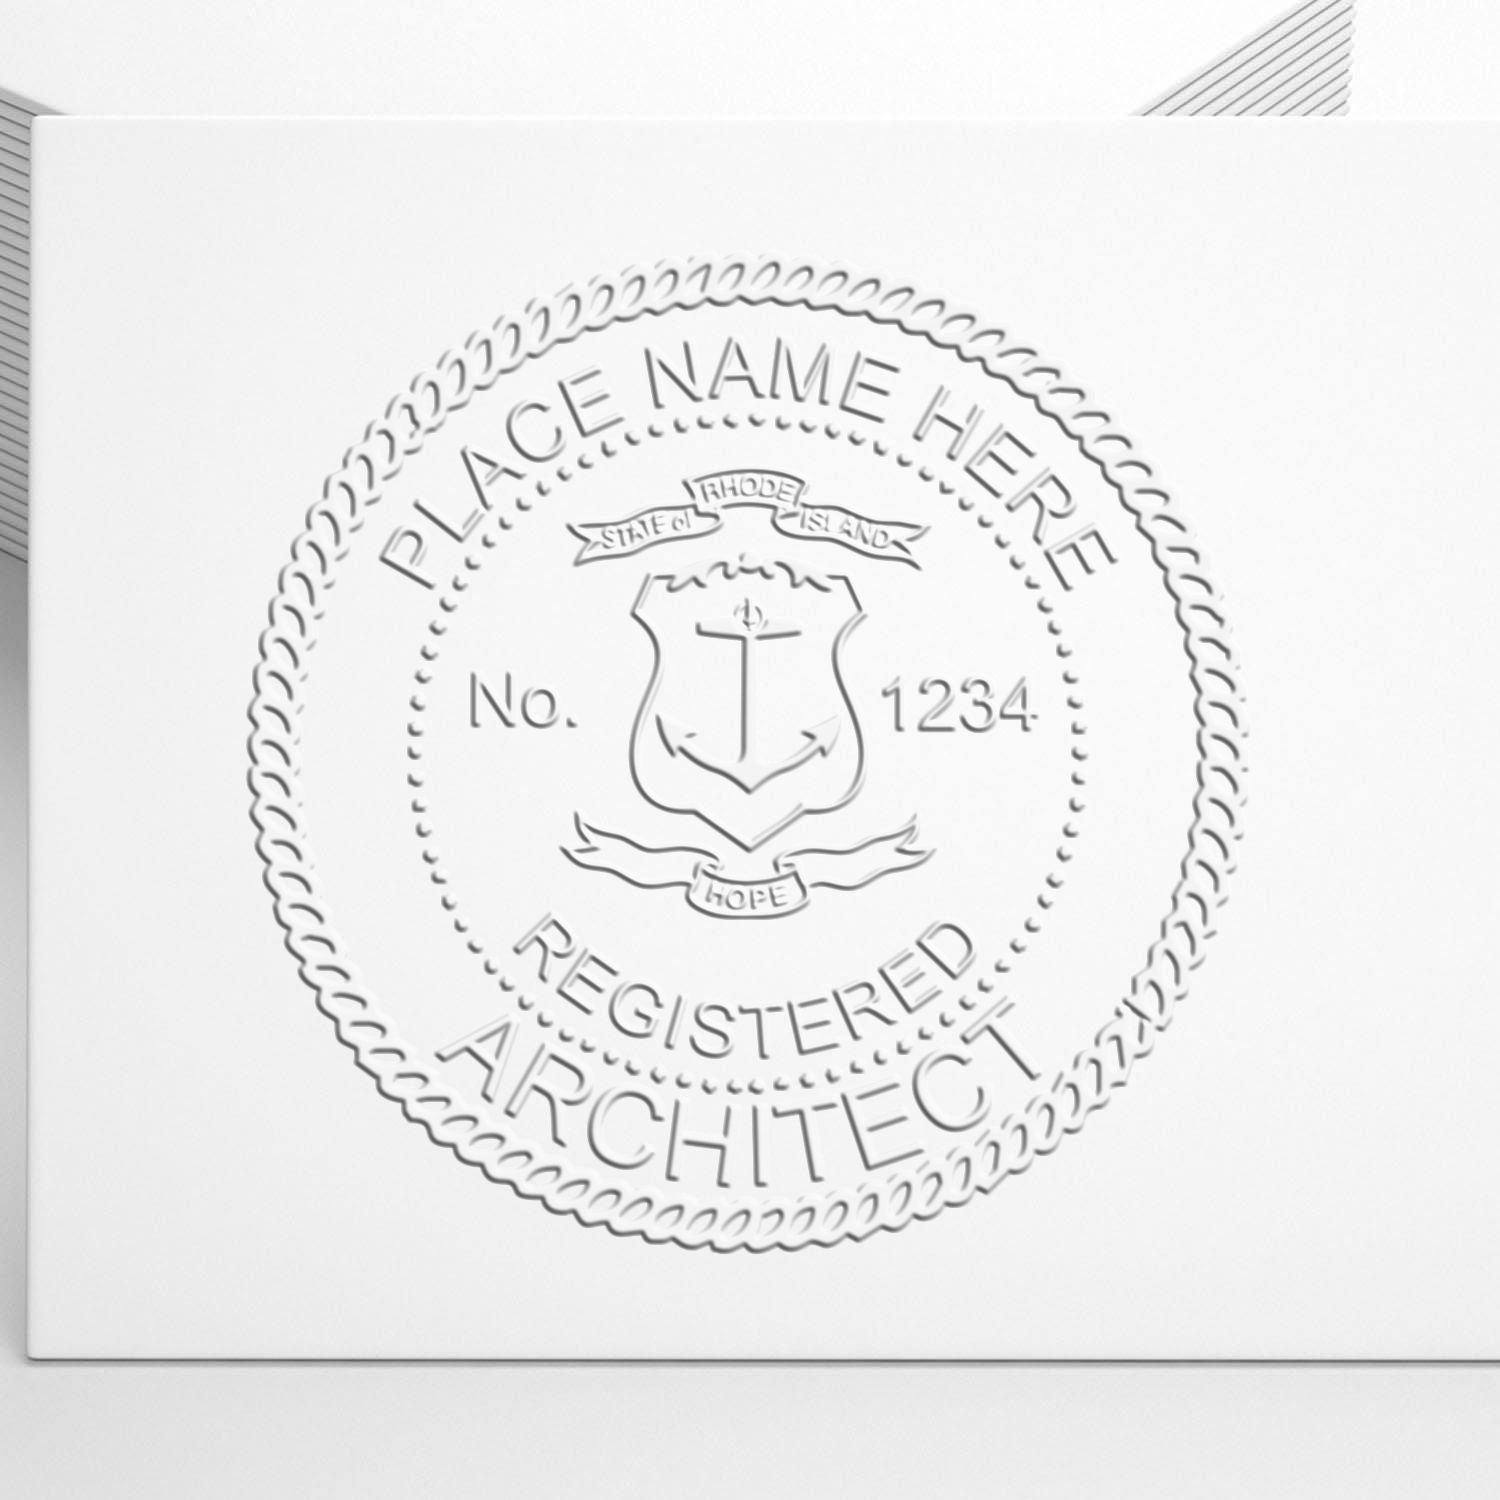 An in use photo of the Hybrid Rhode Island Architect Seal showing a sample imprint on a cardstock